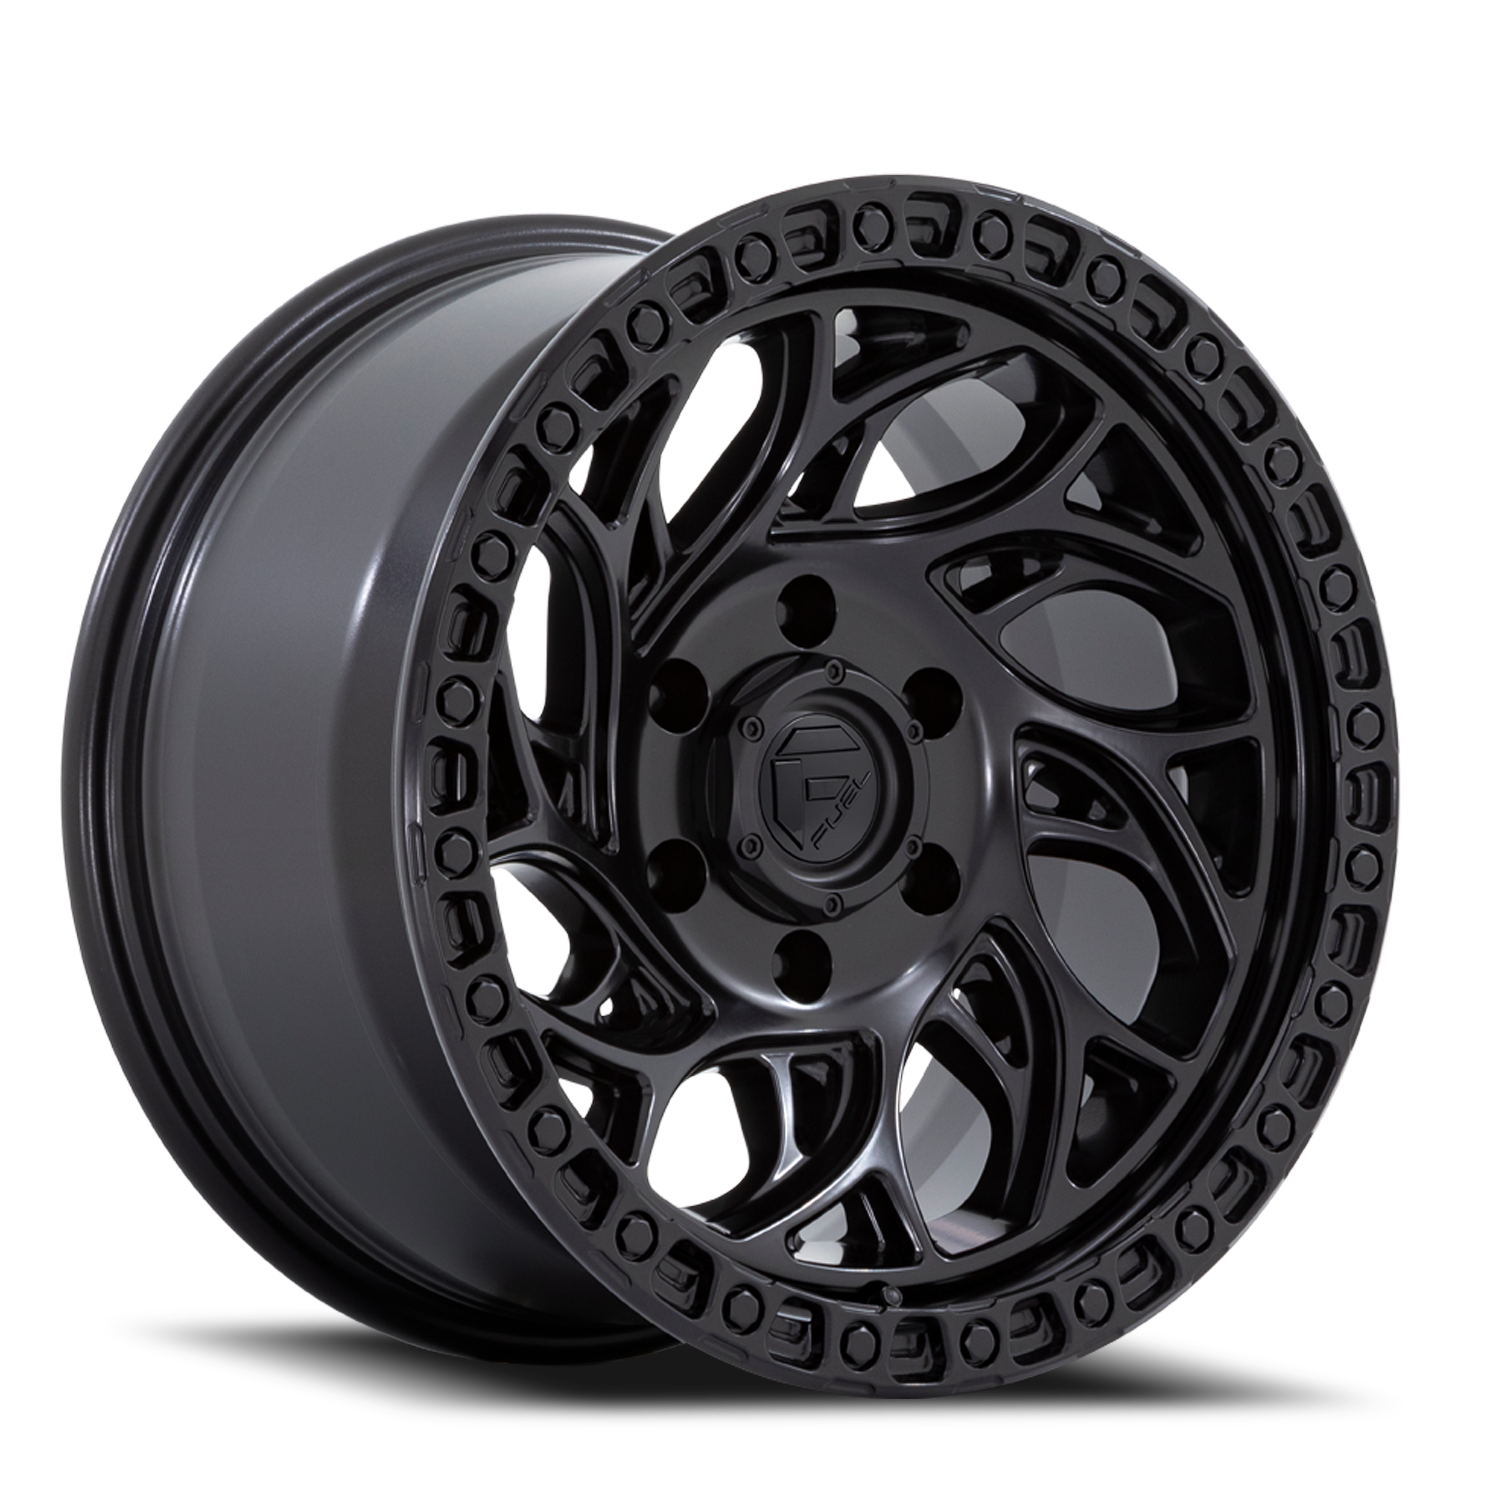 Aluminum Wheels 17X9 Runner OR D852 6 On 135 Blackout 87.1 Bore -12 Offset Fuel Off Road Wheels